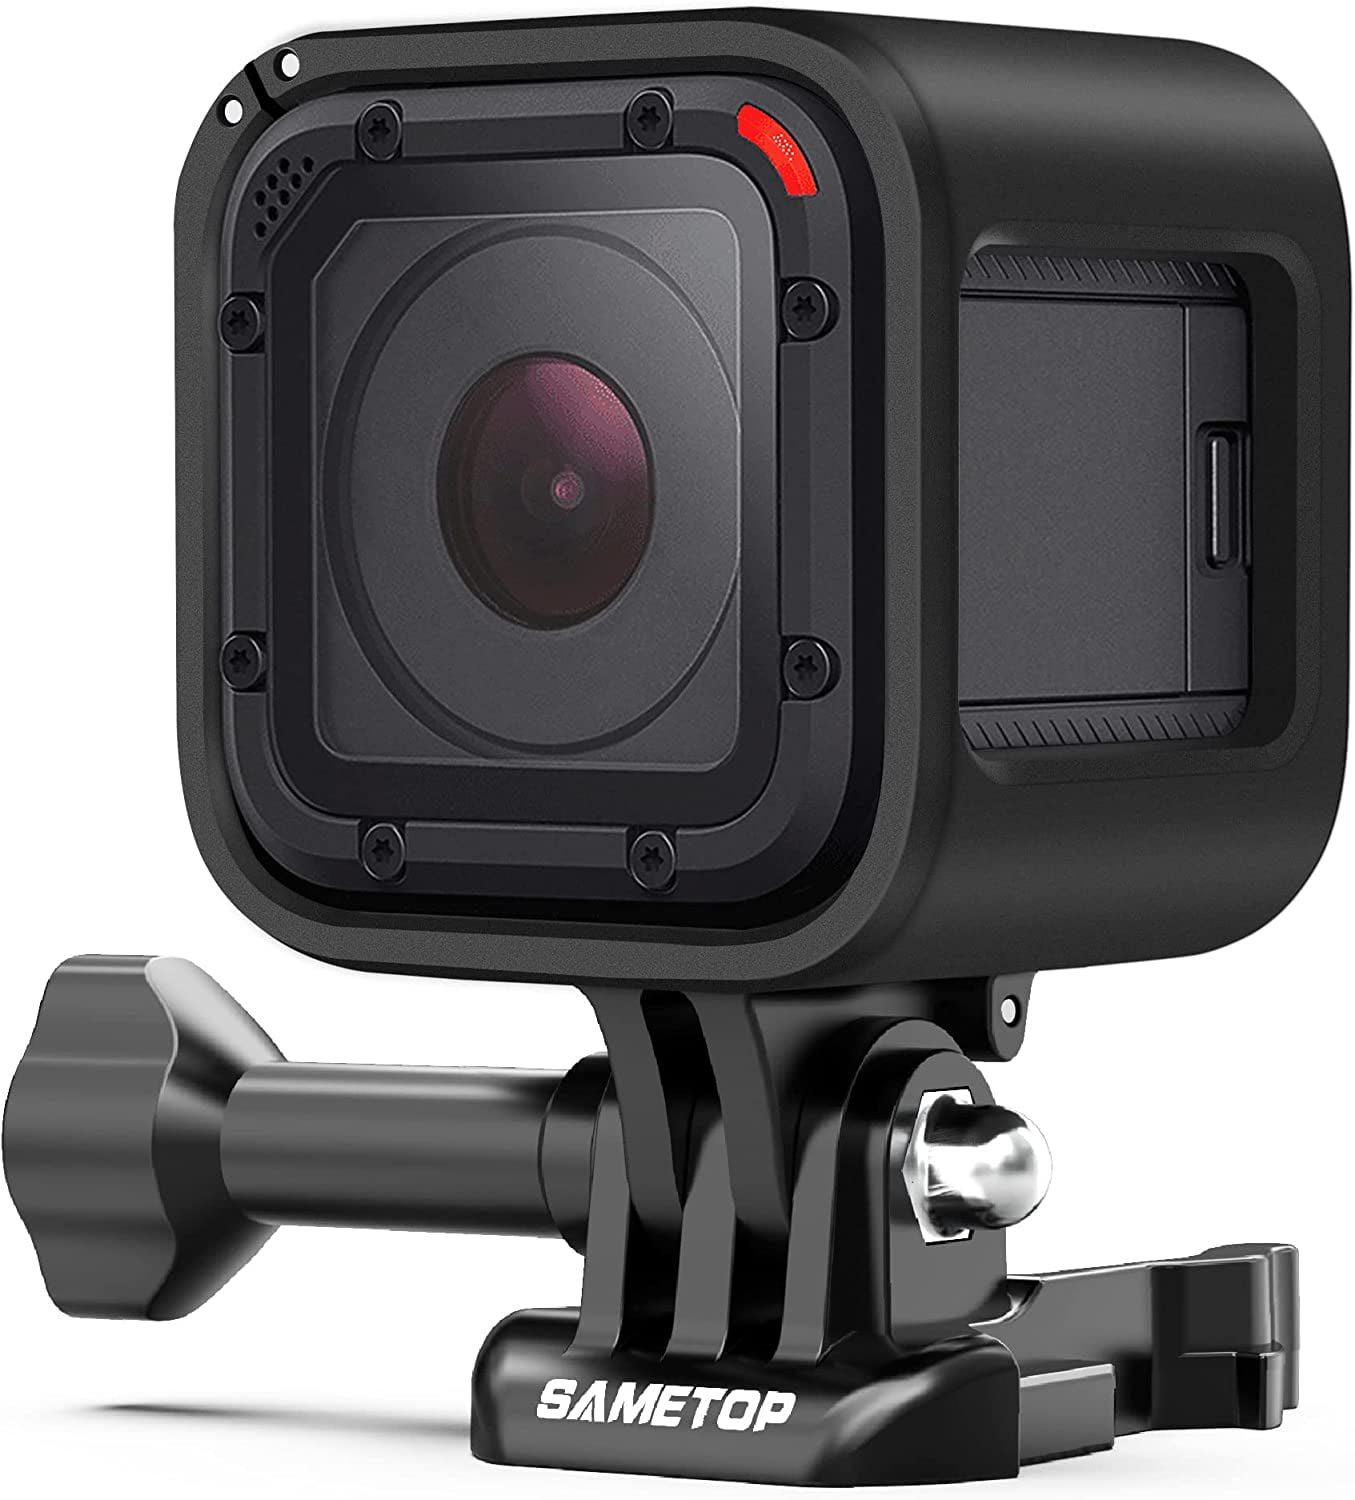 Frame Mount Housing Case Compatible with GoPro Hero 5 Session